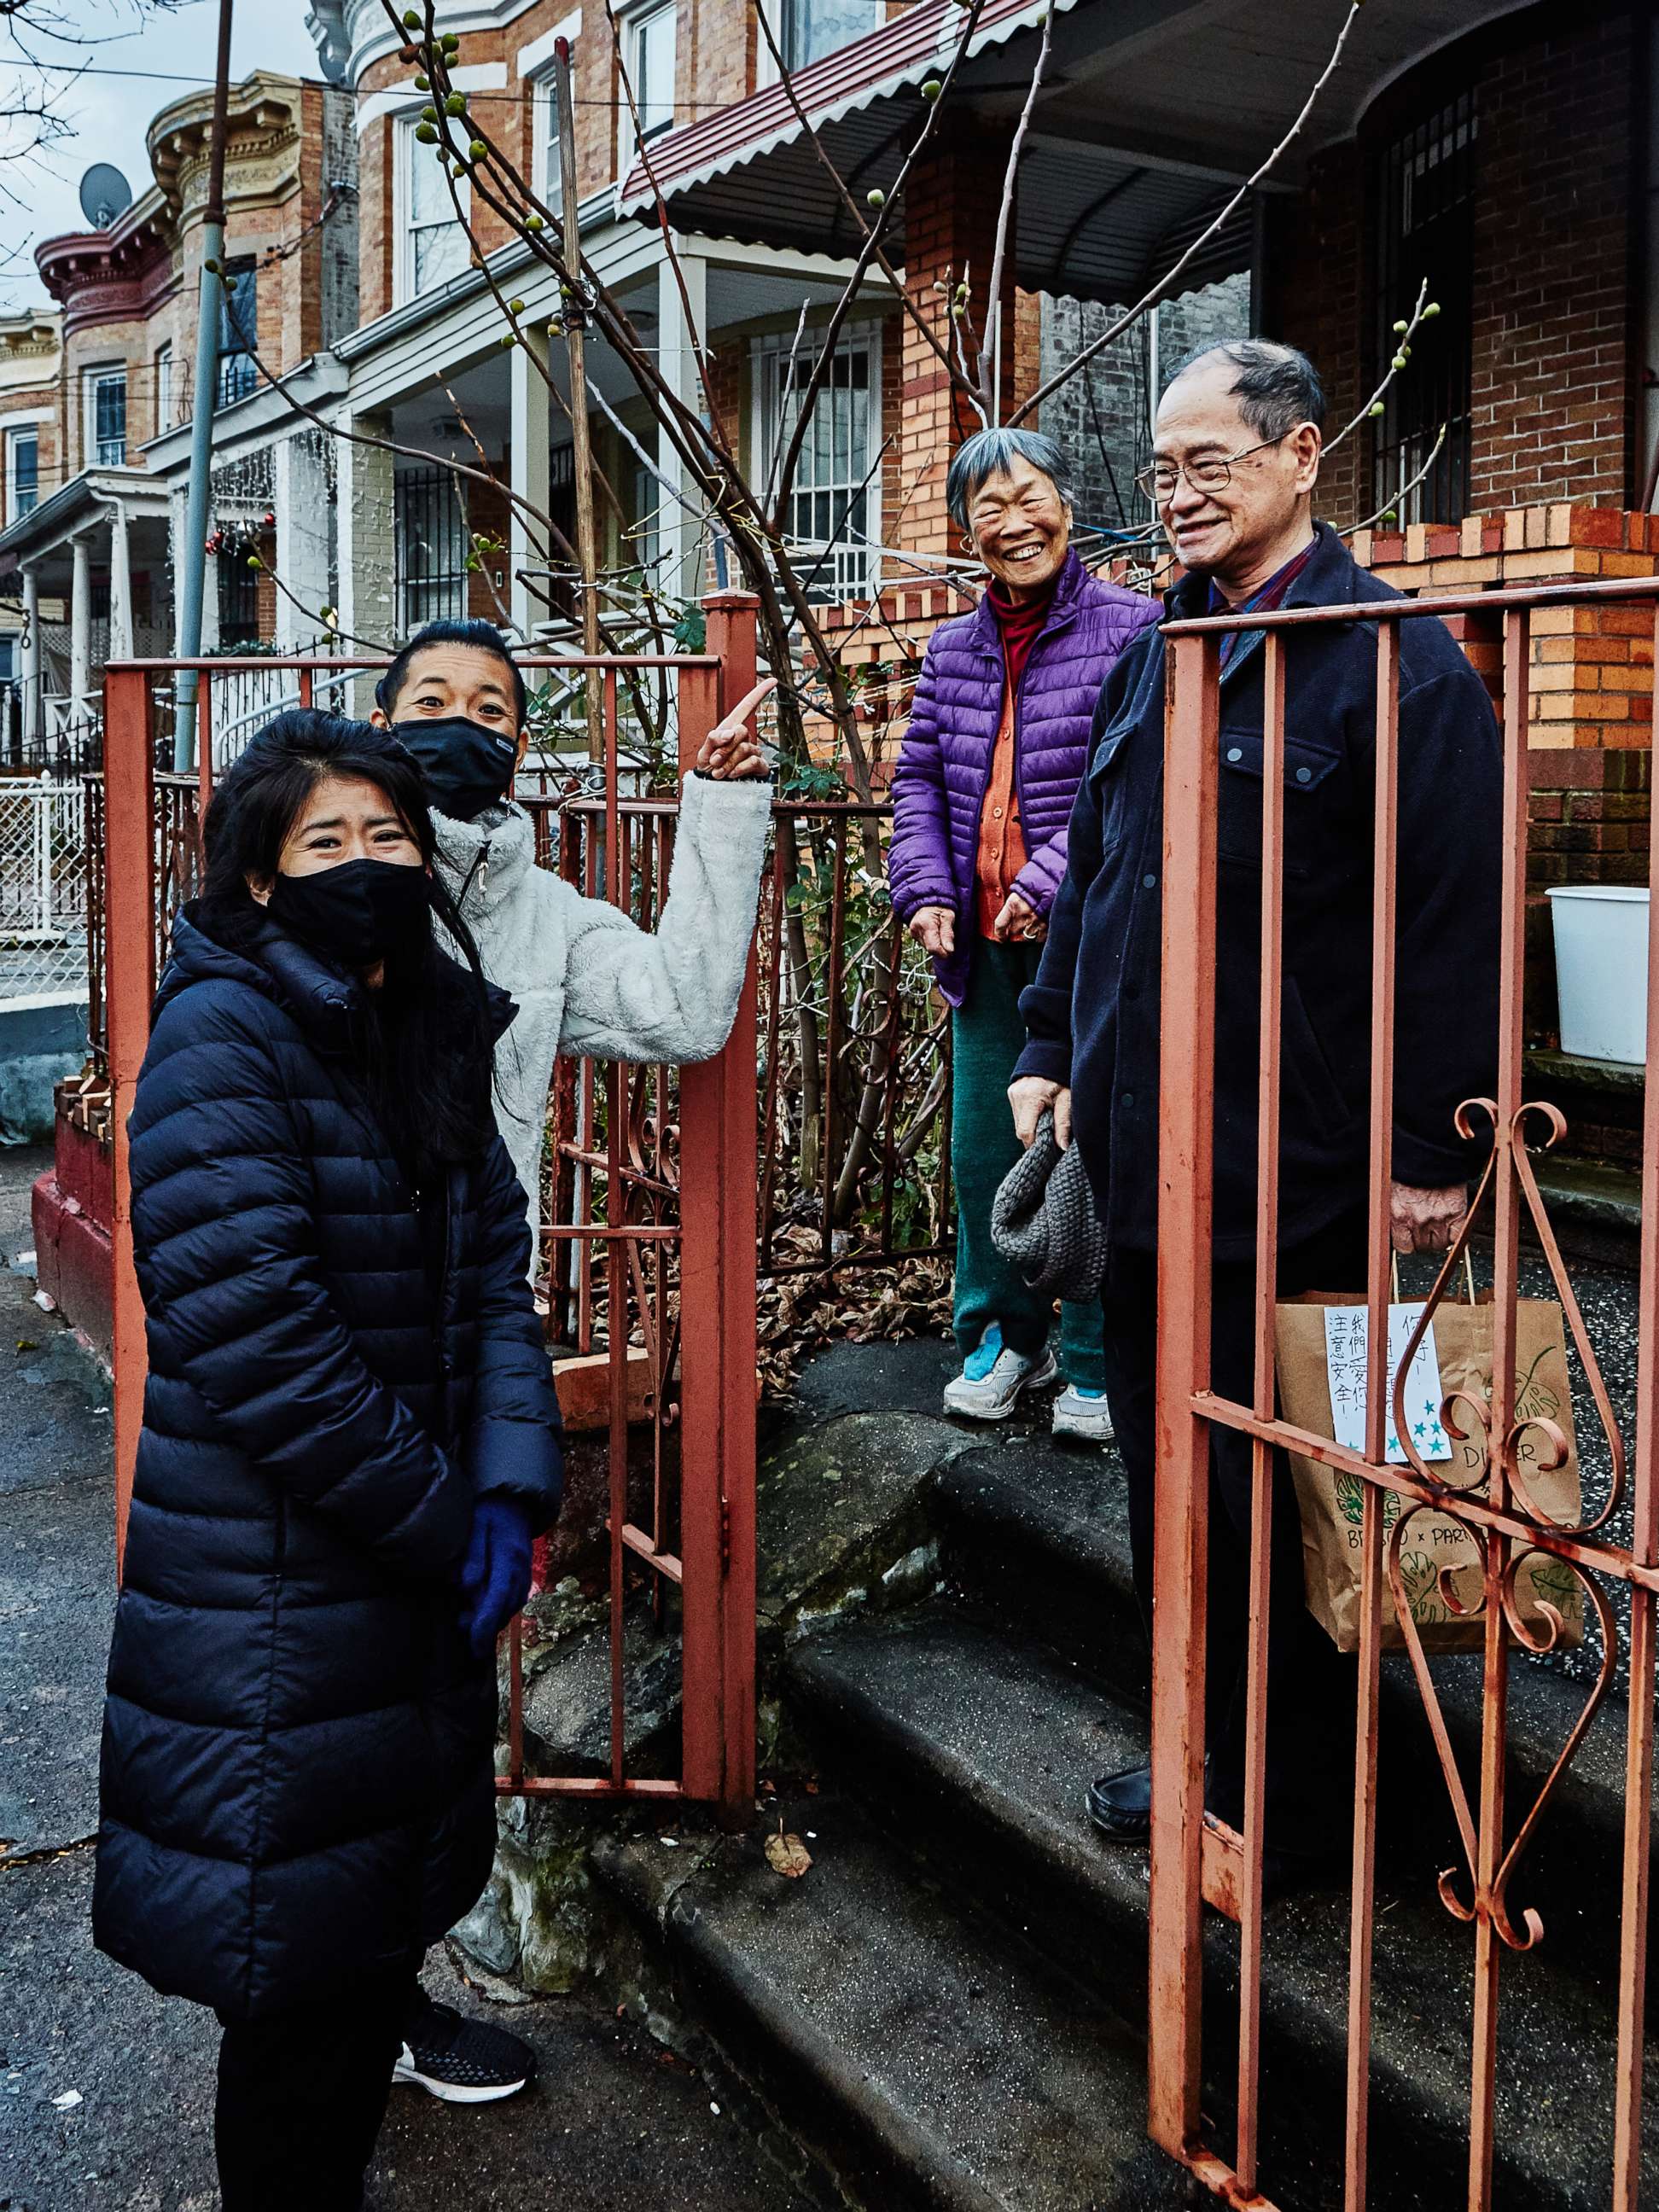 PHOTO: Yin Chang and Moonlynn Tsai deliver meals to seniors in their community amid the COVID-19 pandemic. 